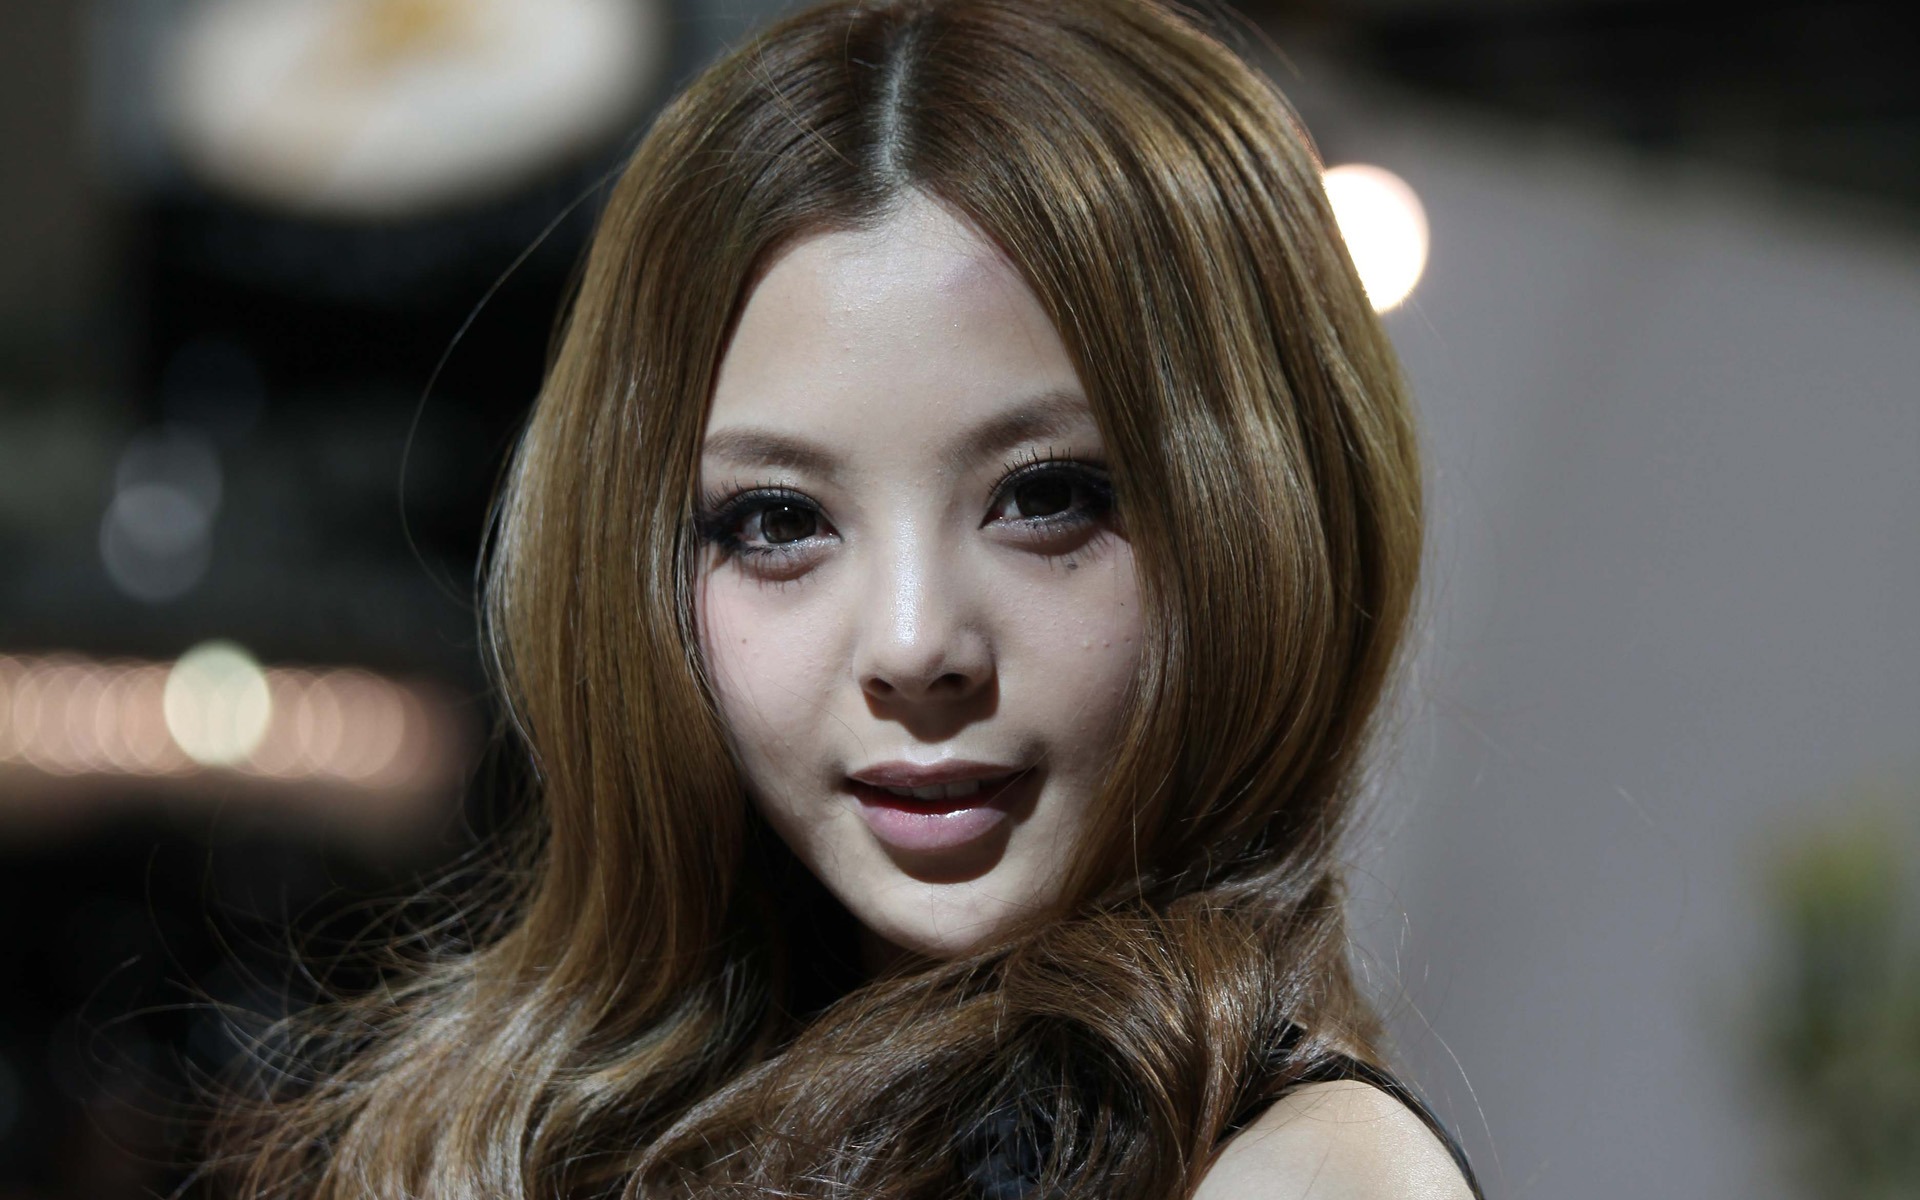 2010 Beijing International Auto Show beauty (1) (the wind chasing the clouds works) #7 - 1920x1200